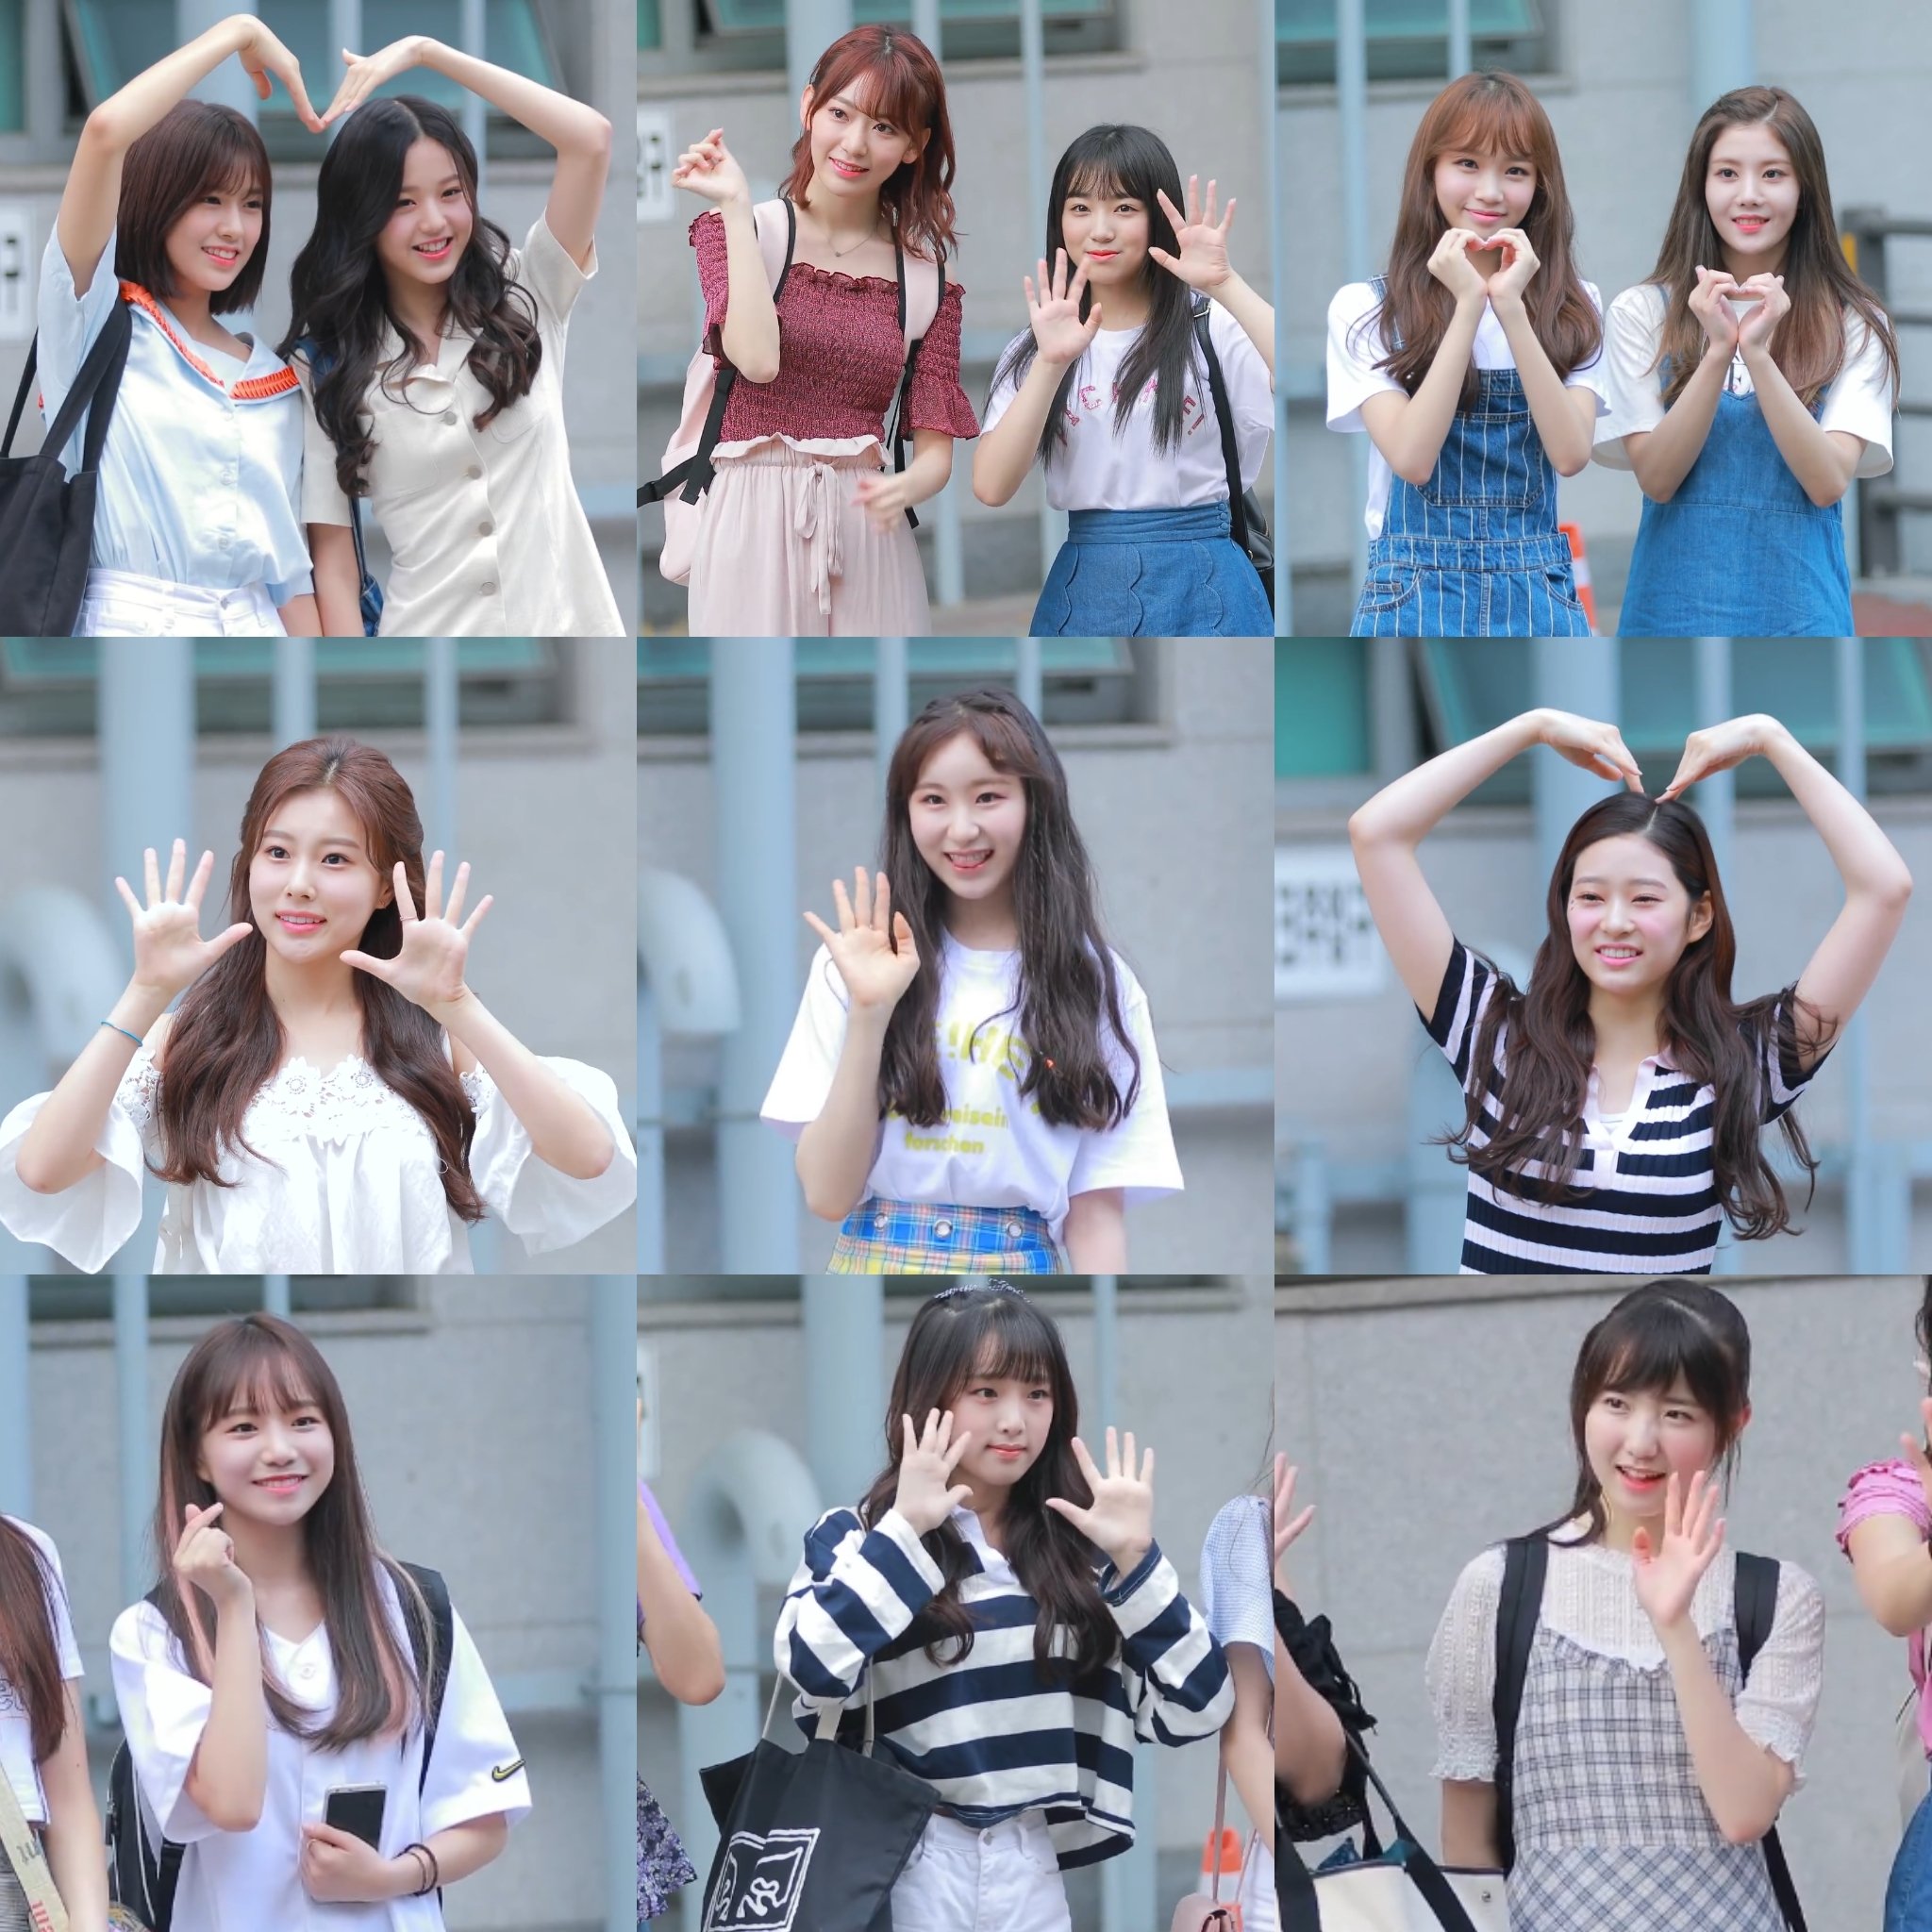 “it's been 2 years since these pictures were taken, back when Izone members were still a ...